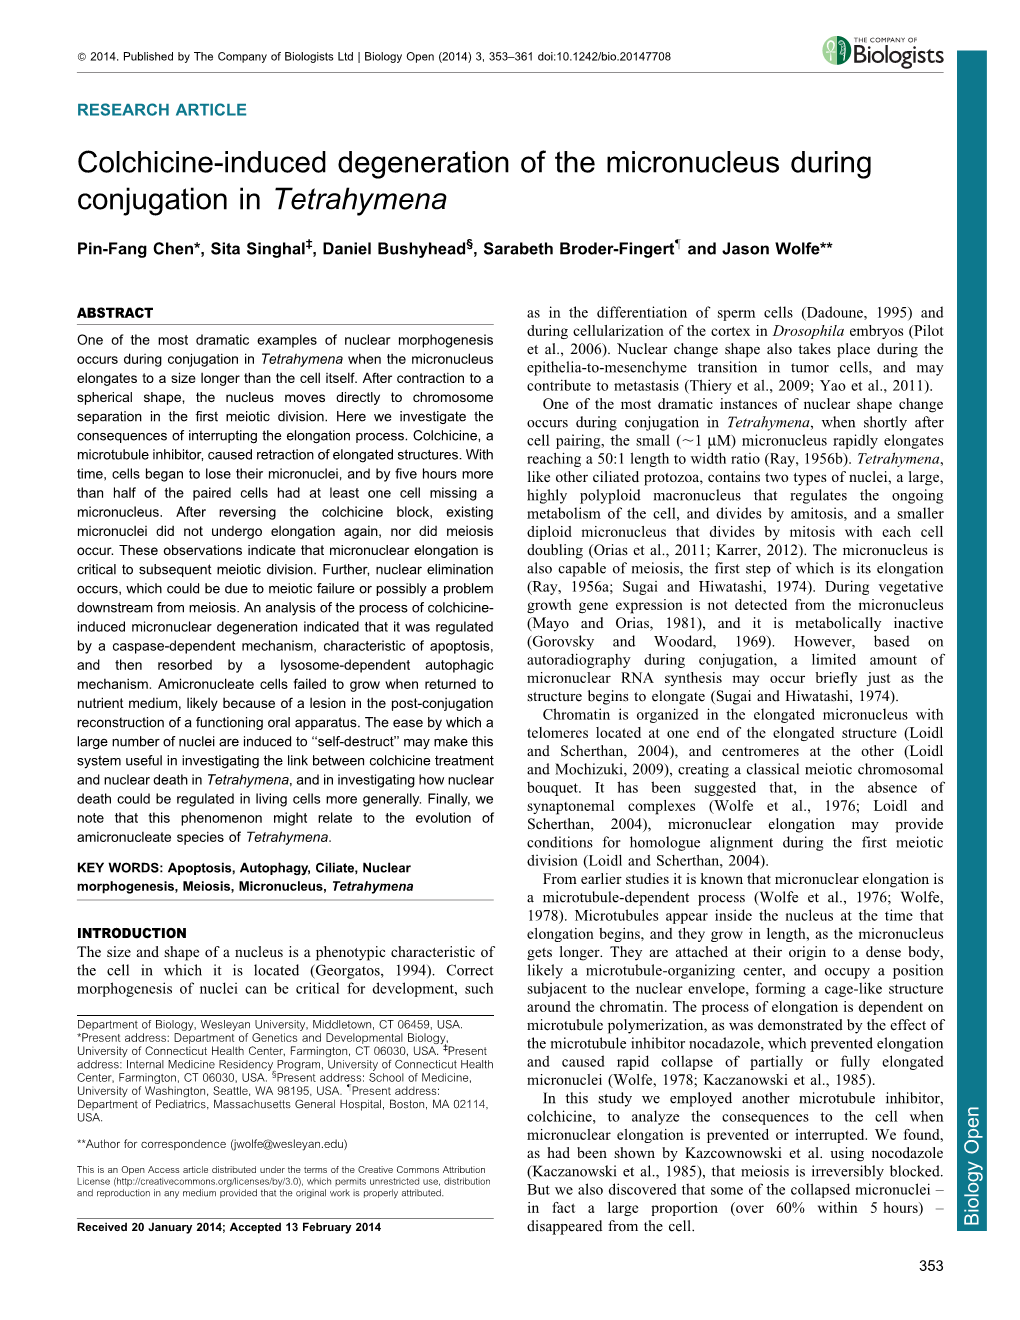 Colchicine-Induced Degeneration of the Micronucleus During Conjugation in Tetrahymena